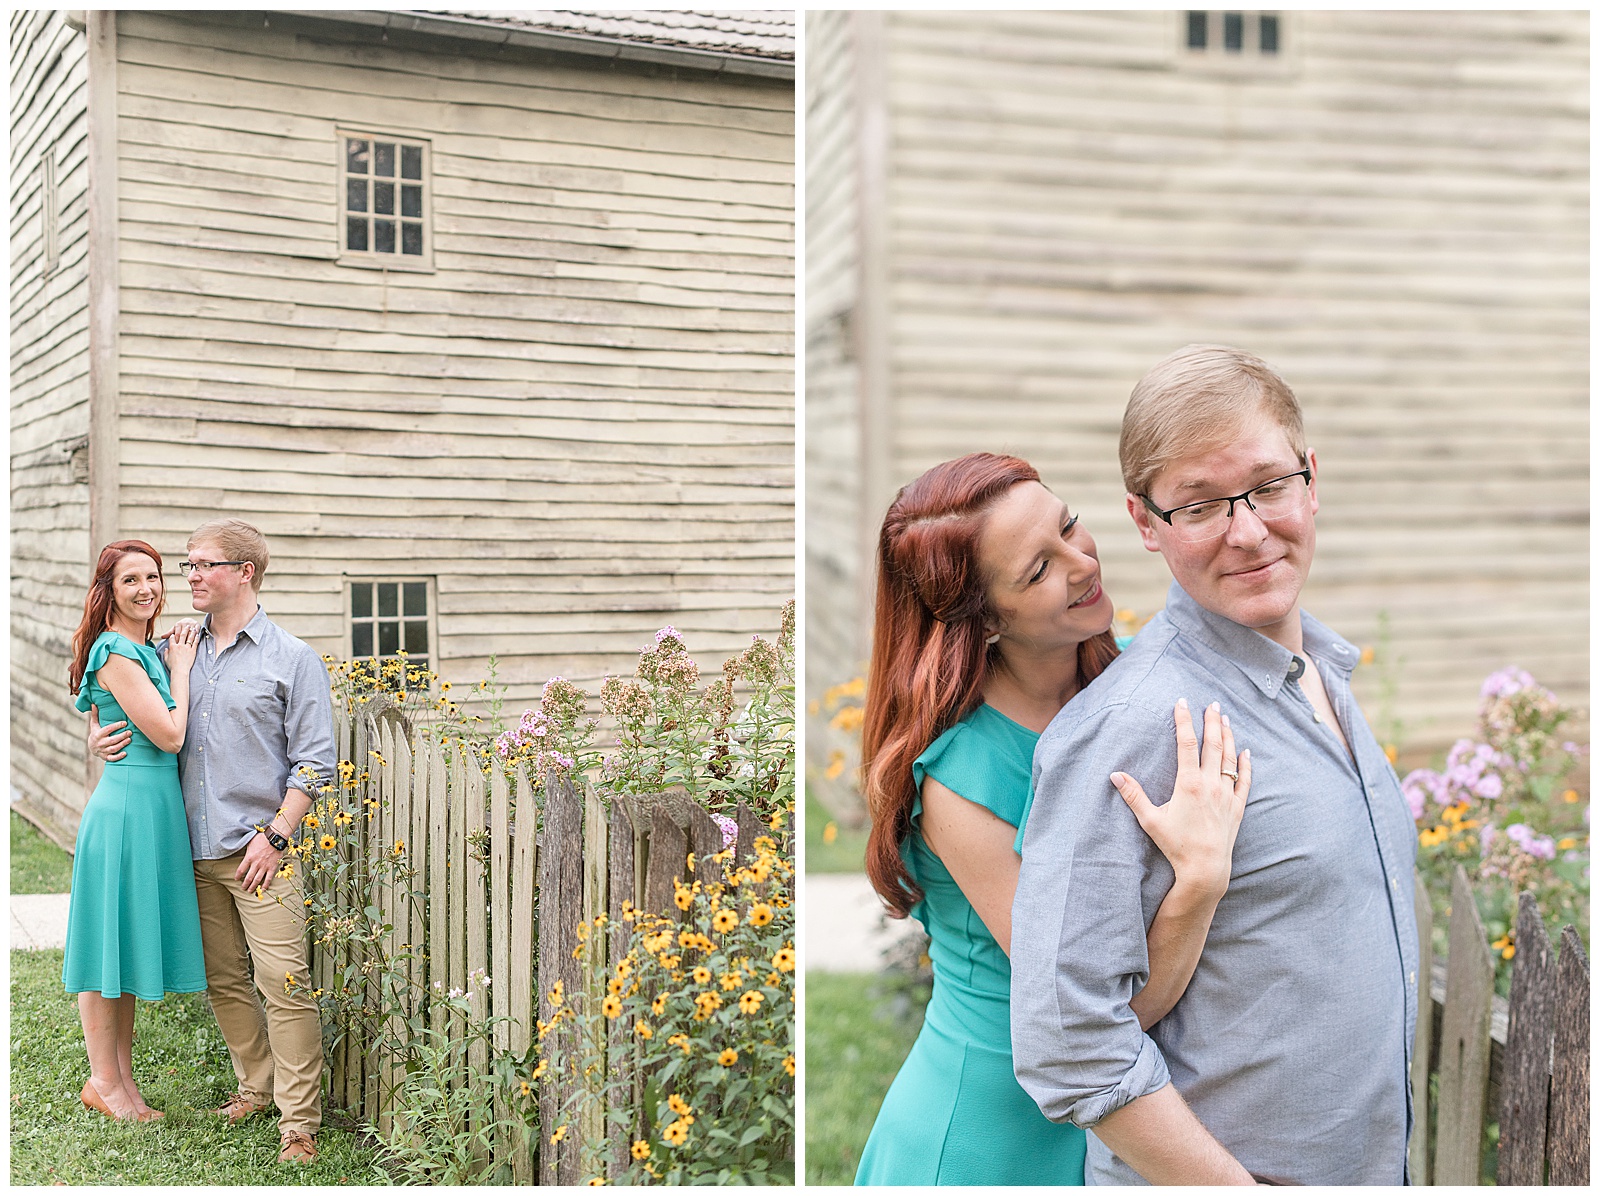 girl hugging guy from behind as he smiles and looks back at her by historic farmhouse